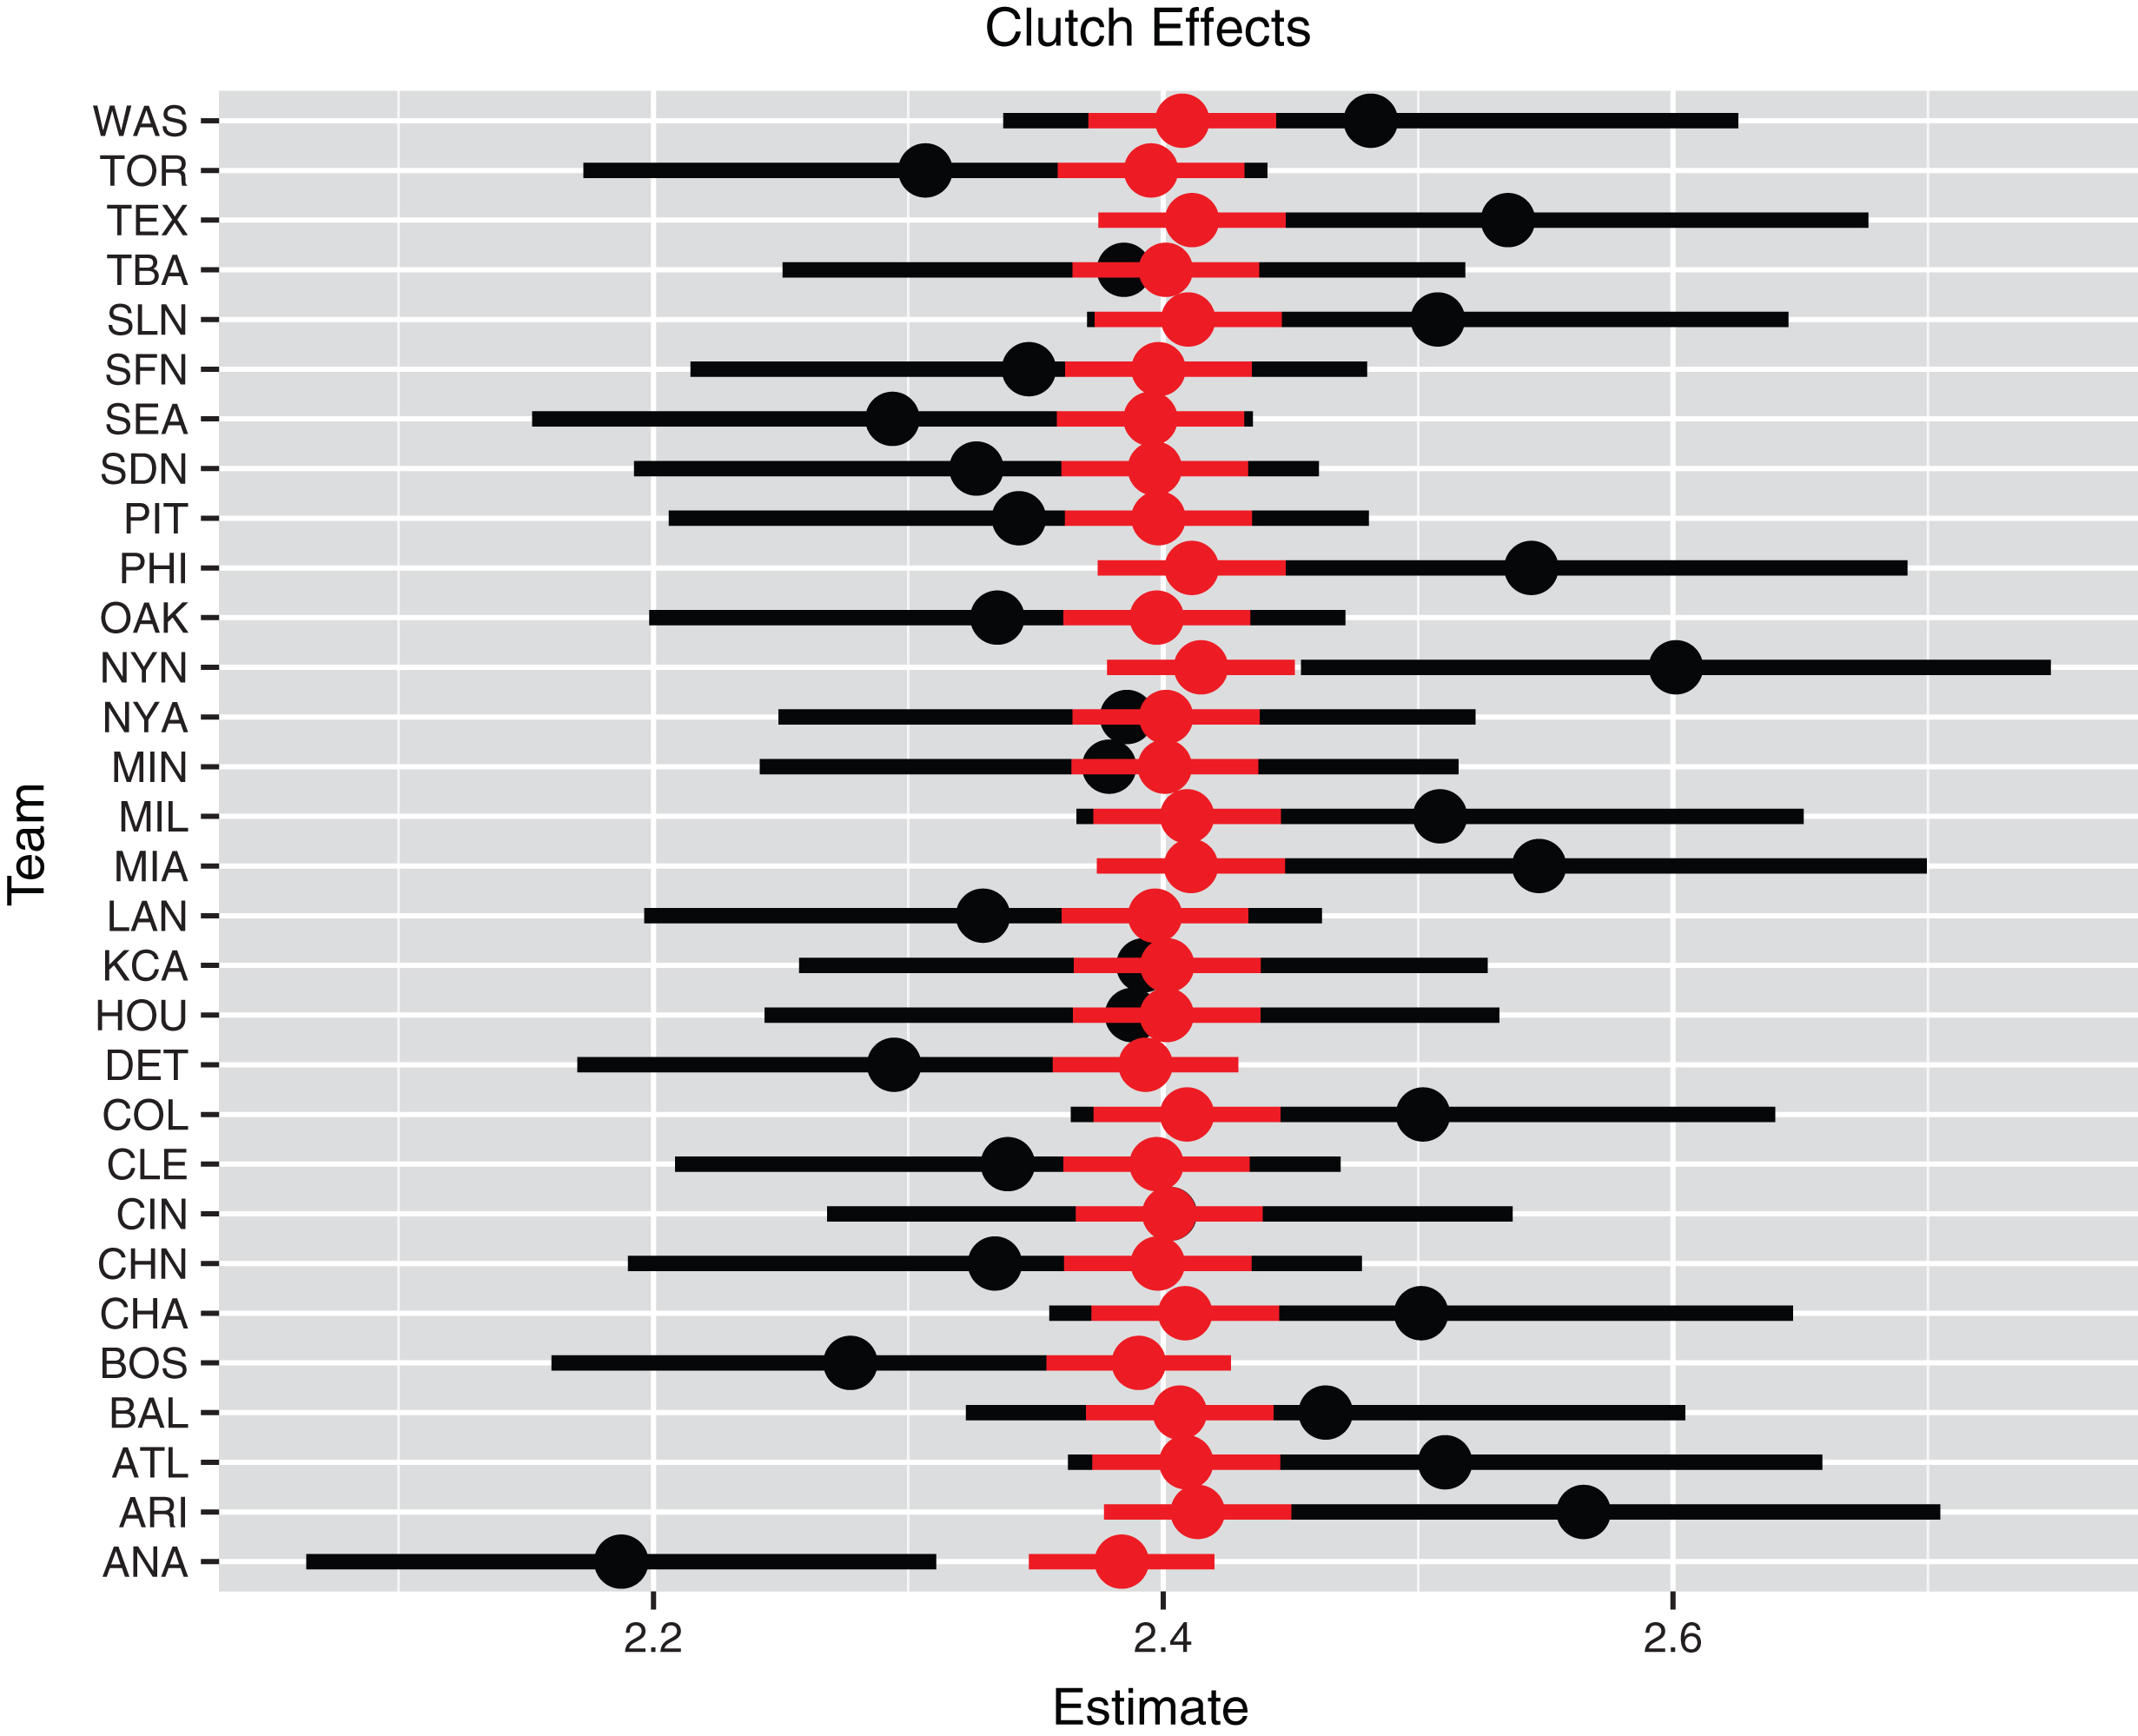 Individual and multilevel clutch effects for all teams. The black line represents the individual estimate plus and minus the standard error and the red line represents the multilevel estimate plus and minus the standard error.